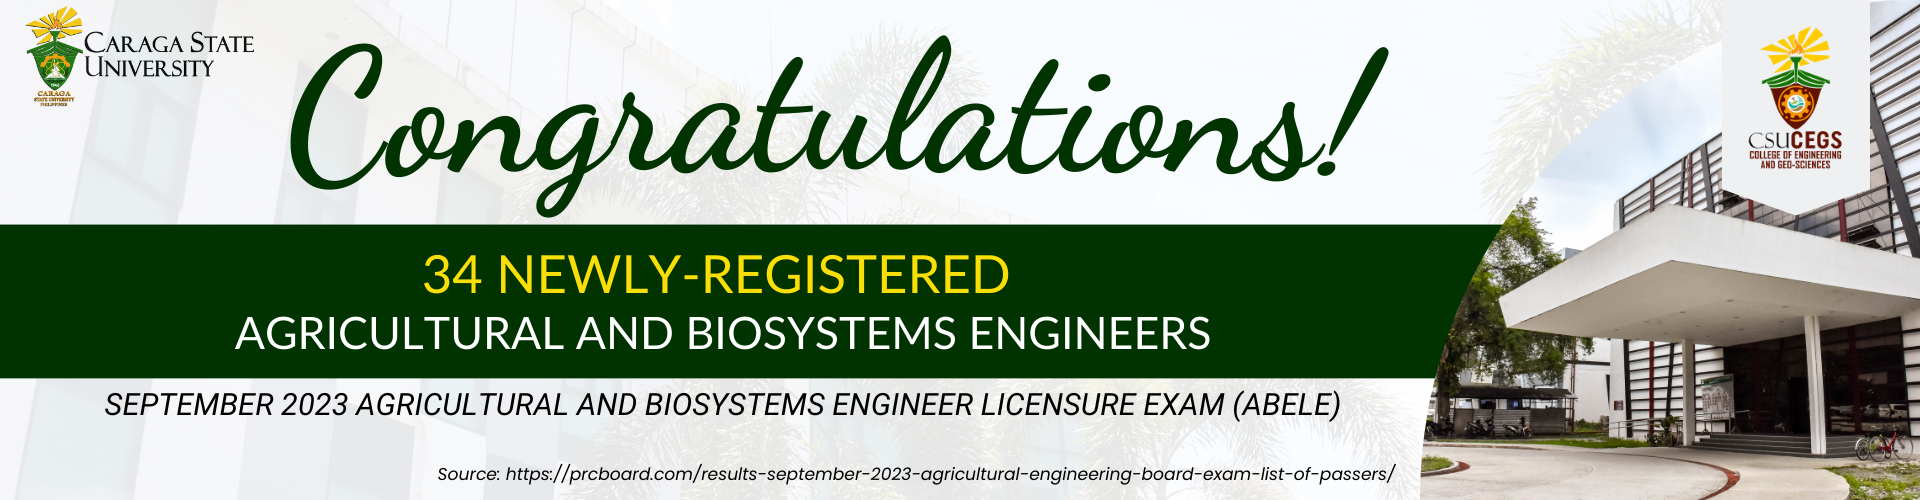 September 2023 Agricultural and Biosystems Engineer Licensure Exam